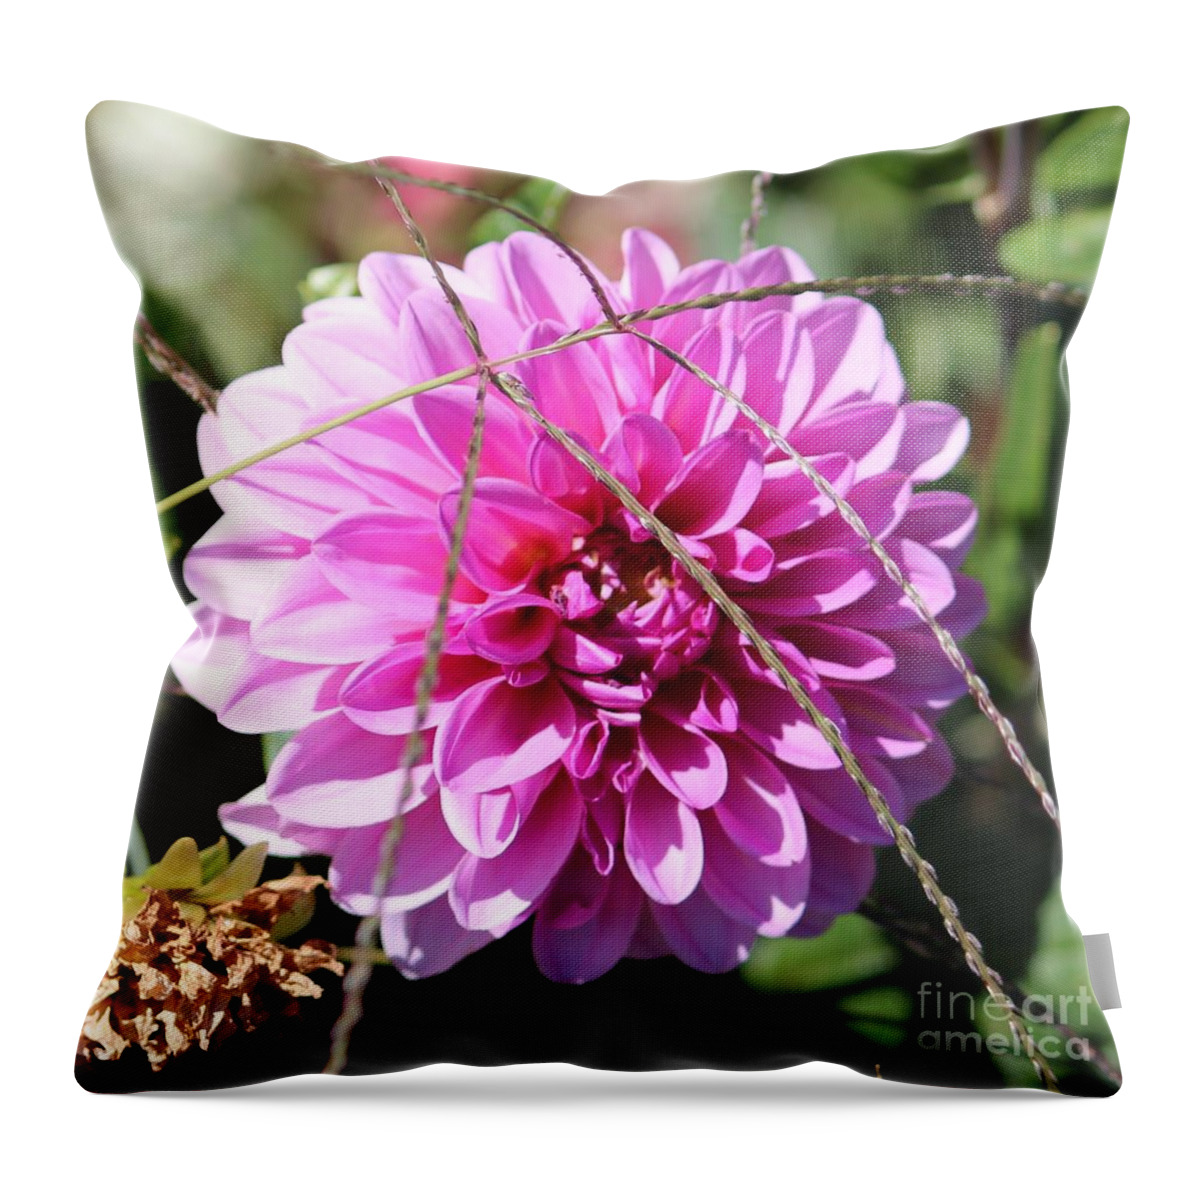 Pink Throw Pillow featuring the photograph Pink Flower by Cynthia Snyder